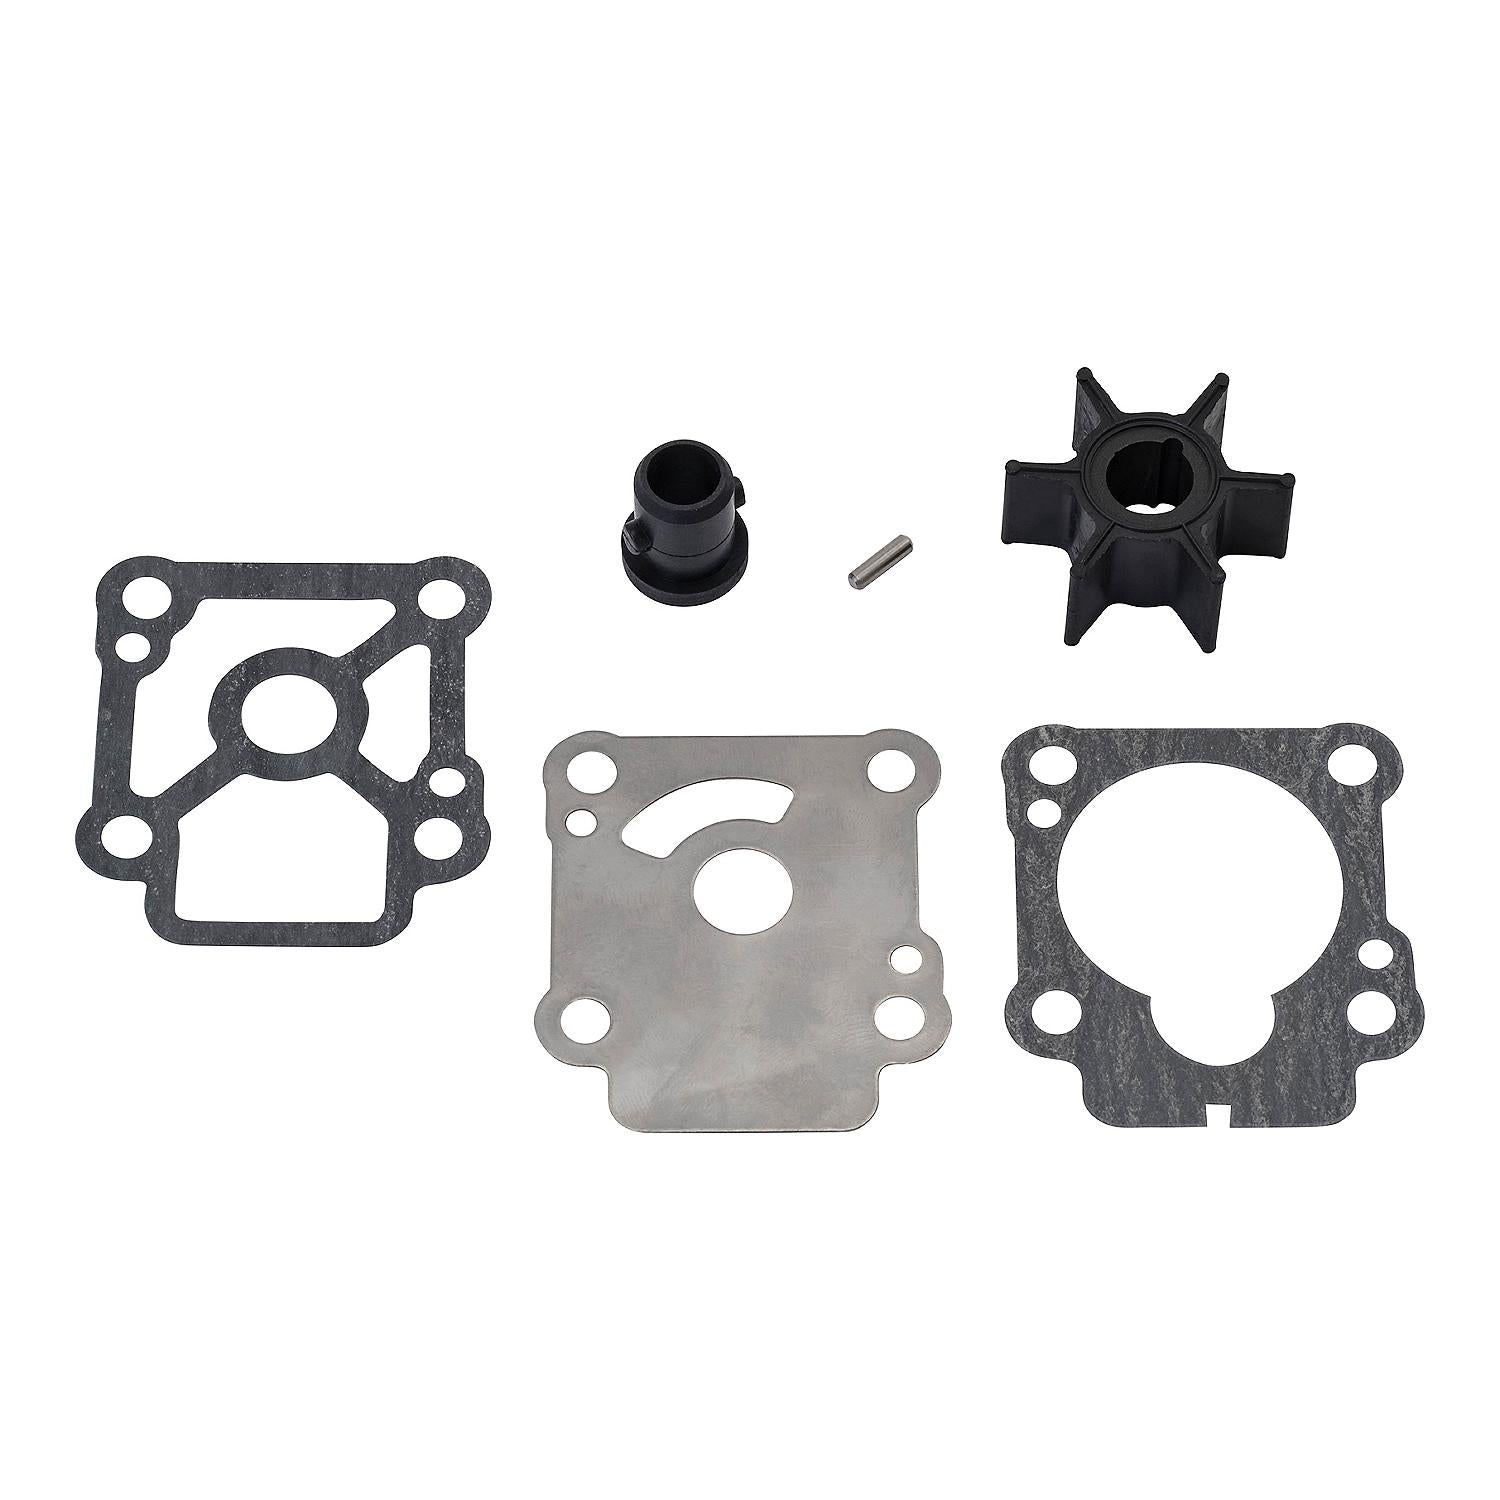 Quicksilver 803748Q01 Water Pump Impeller Repair Kit for Mercury and Mariner 8-9.9 Hp 4-stroke Outboards